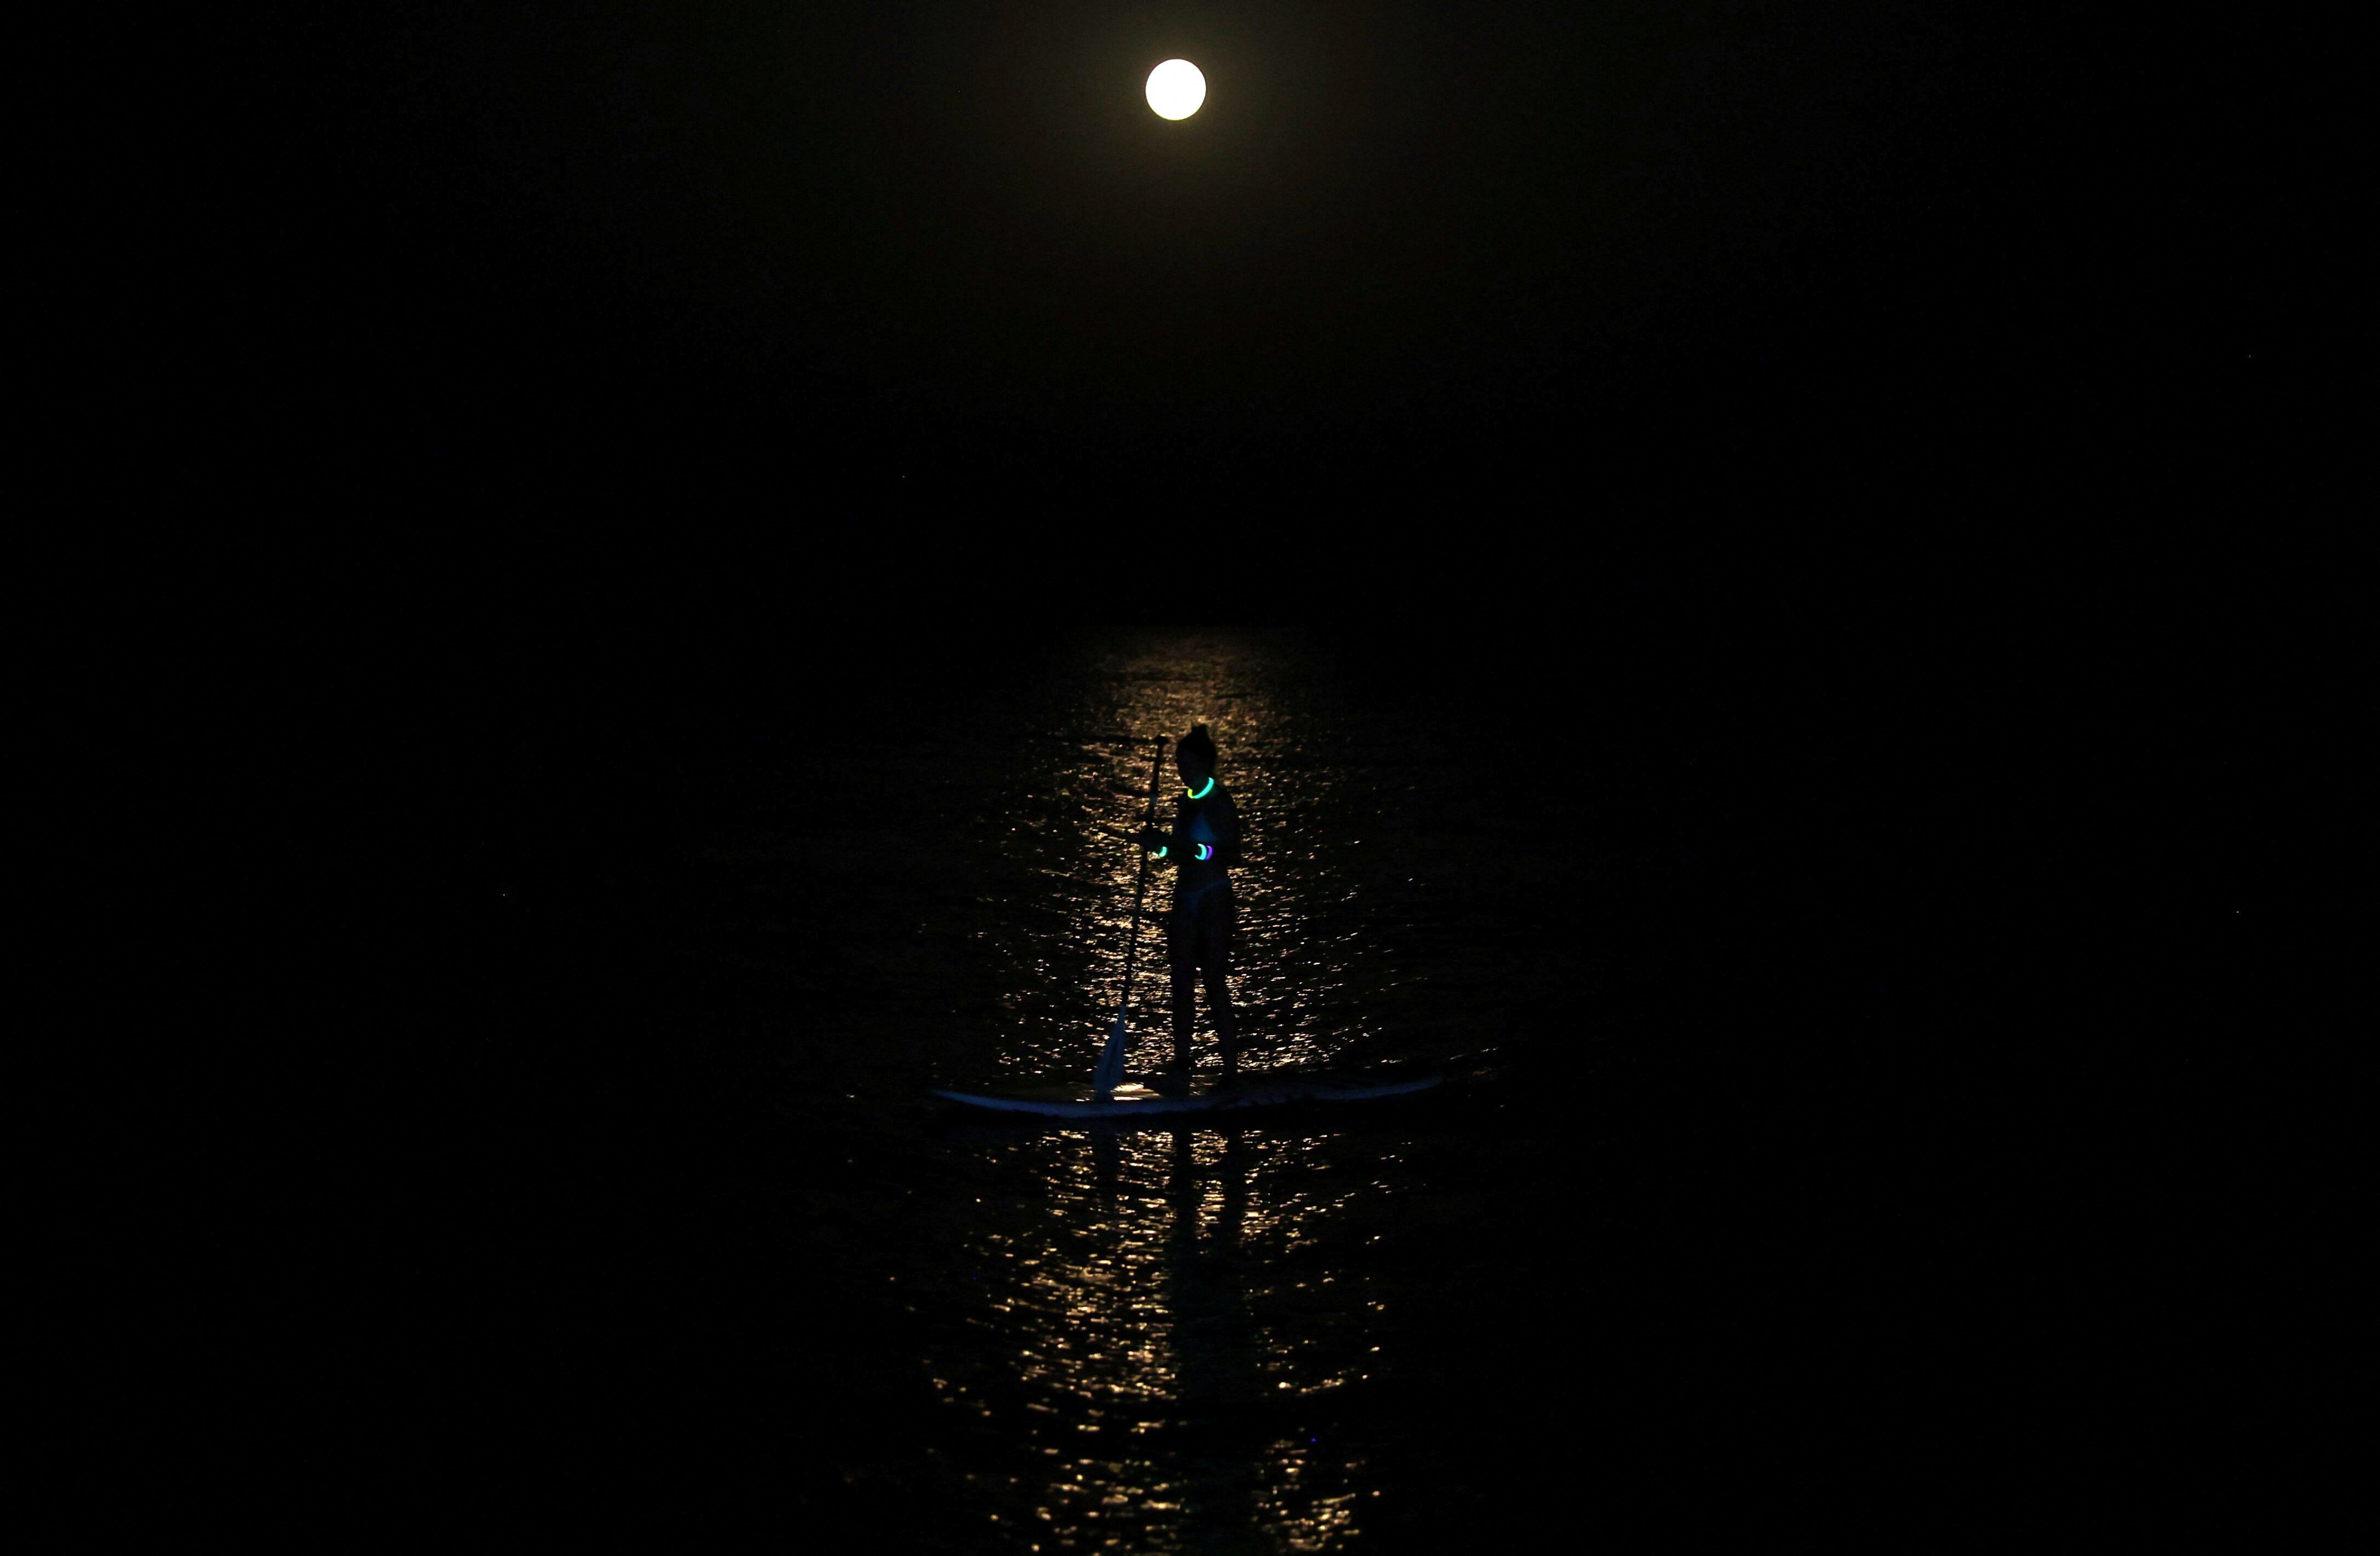 A person at night paddles a narrow board standing up,  a sliver of light illuminating them.